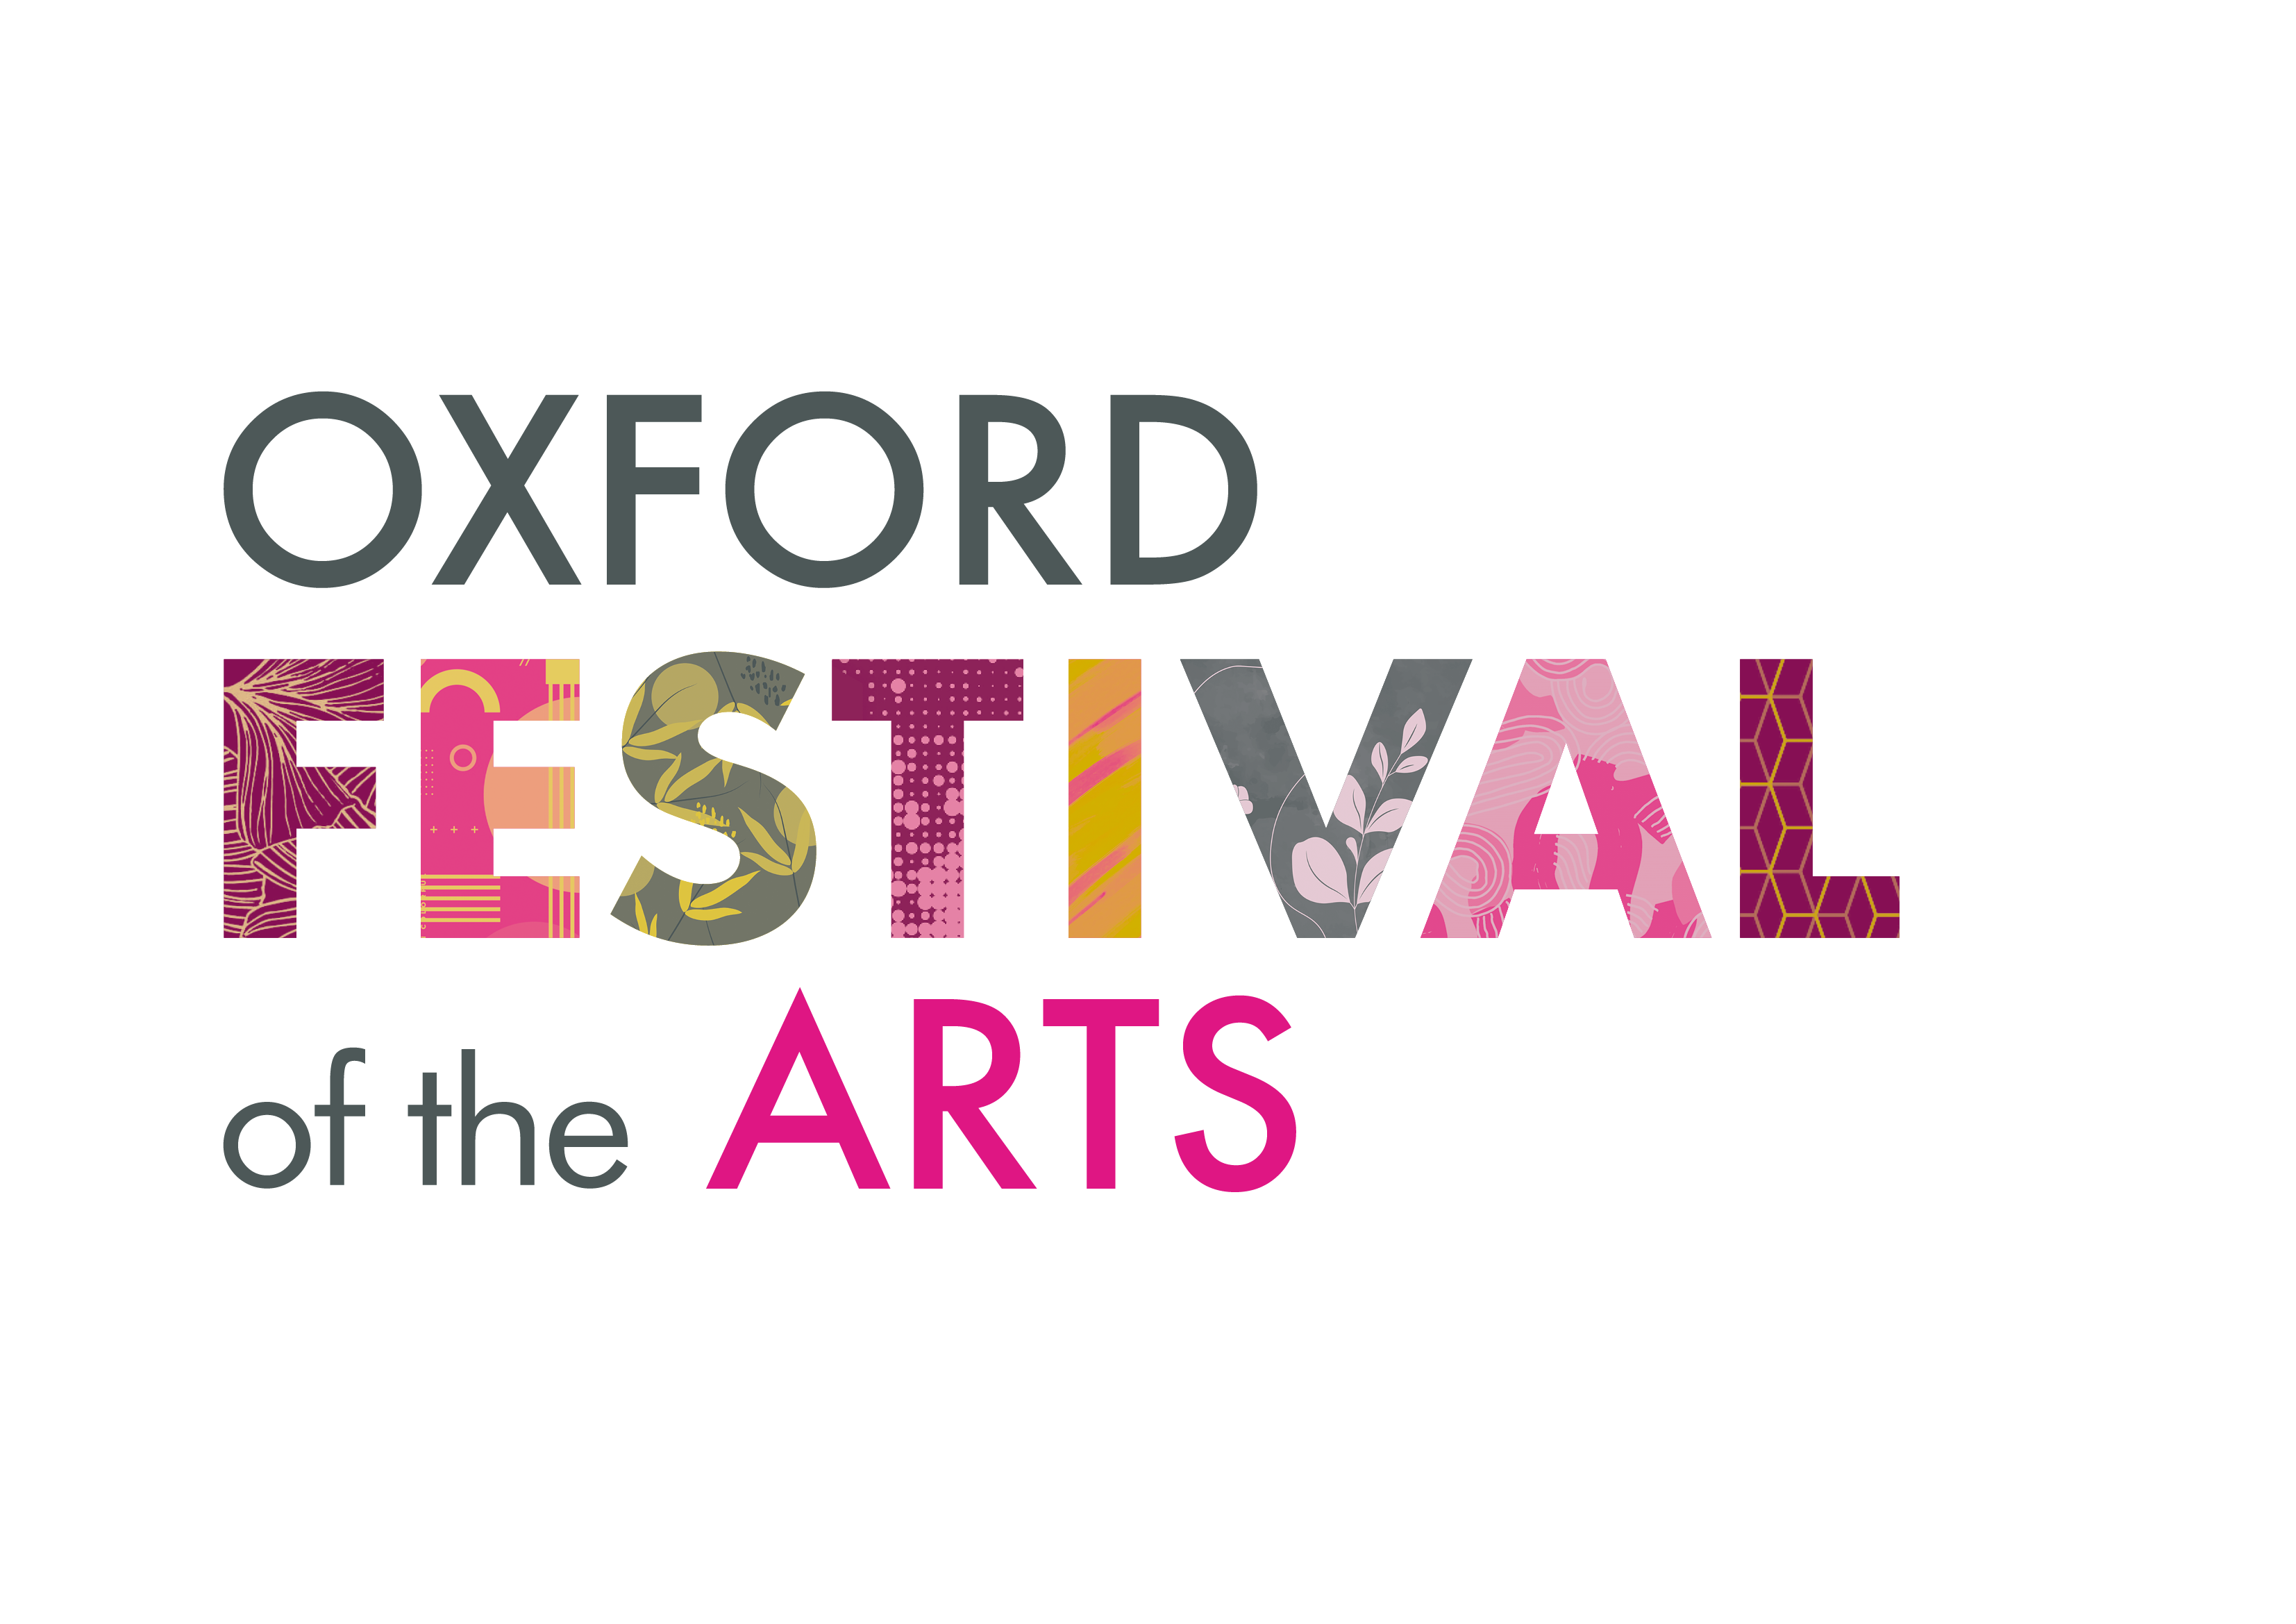 The Oxford Festival of the Arts logo